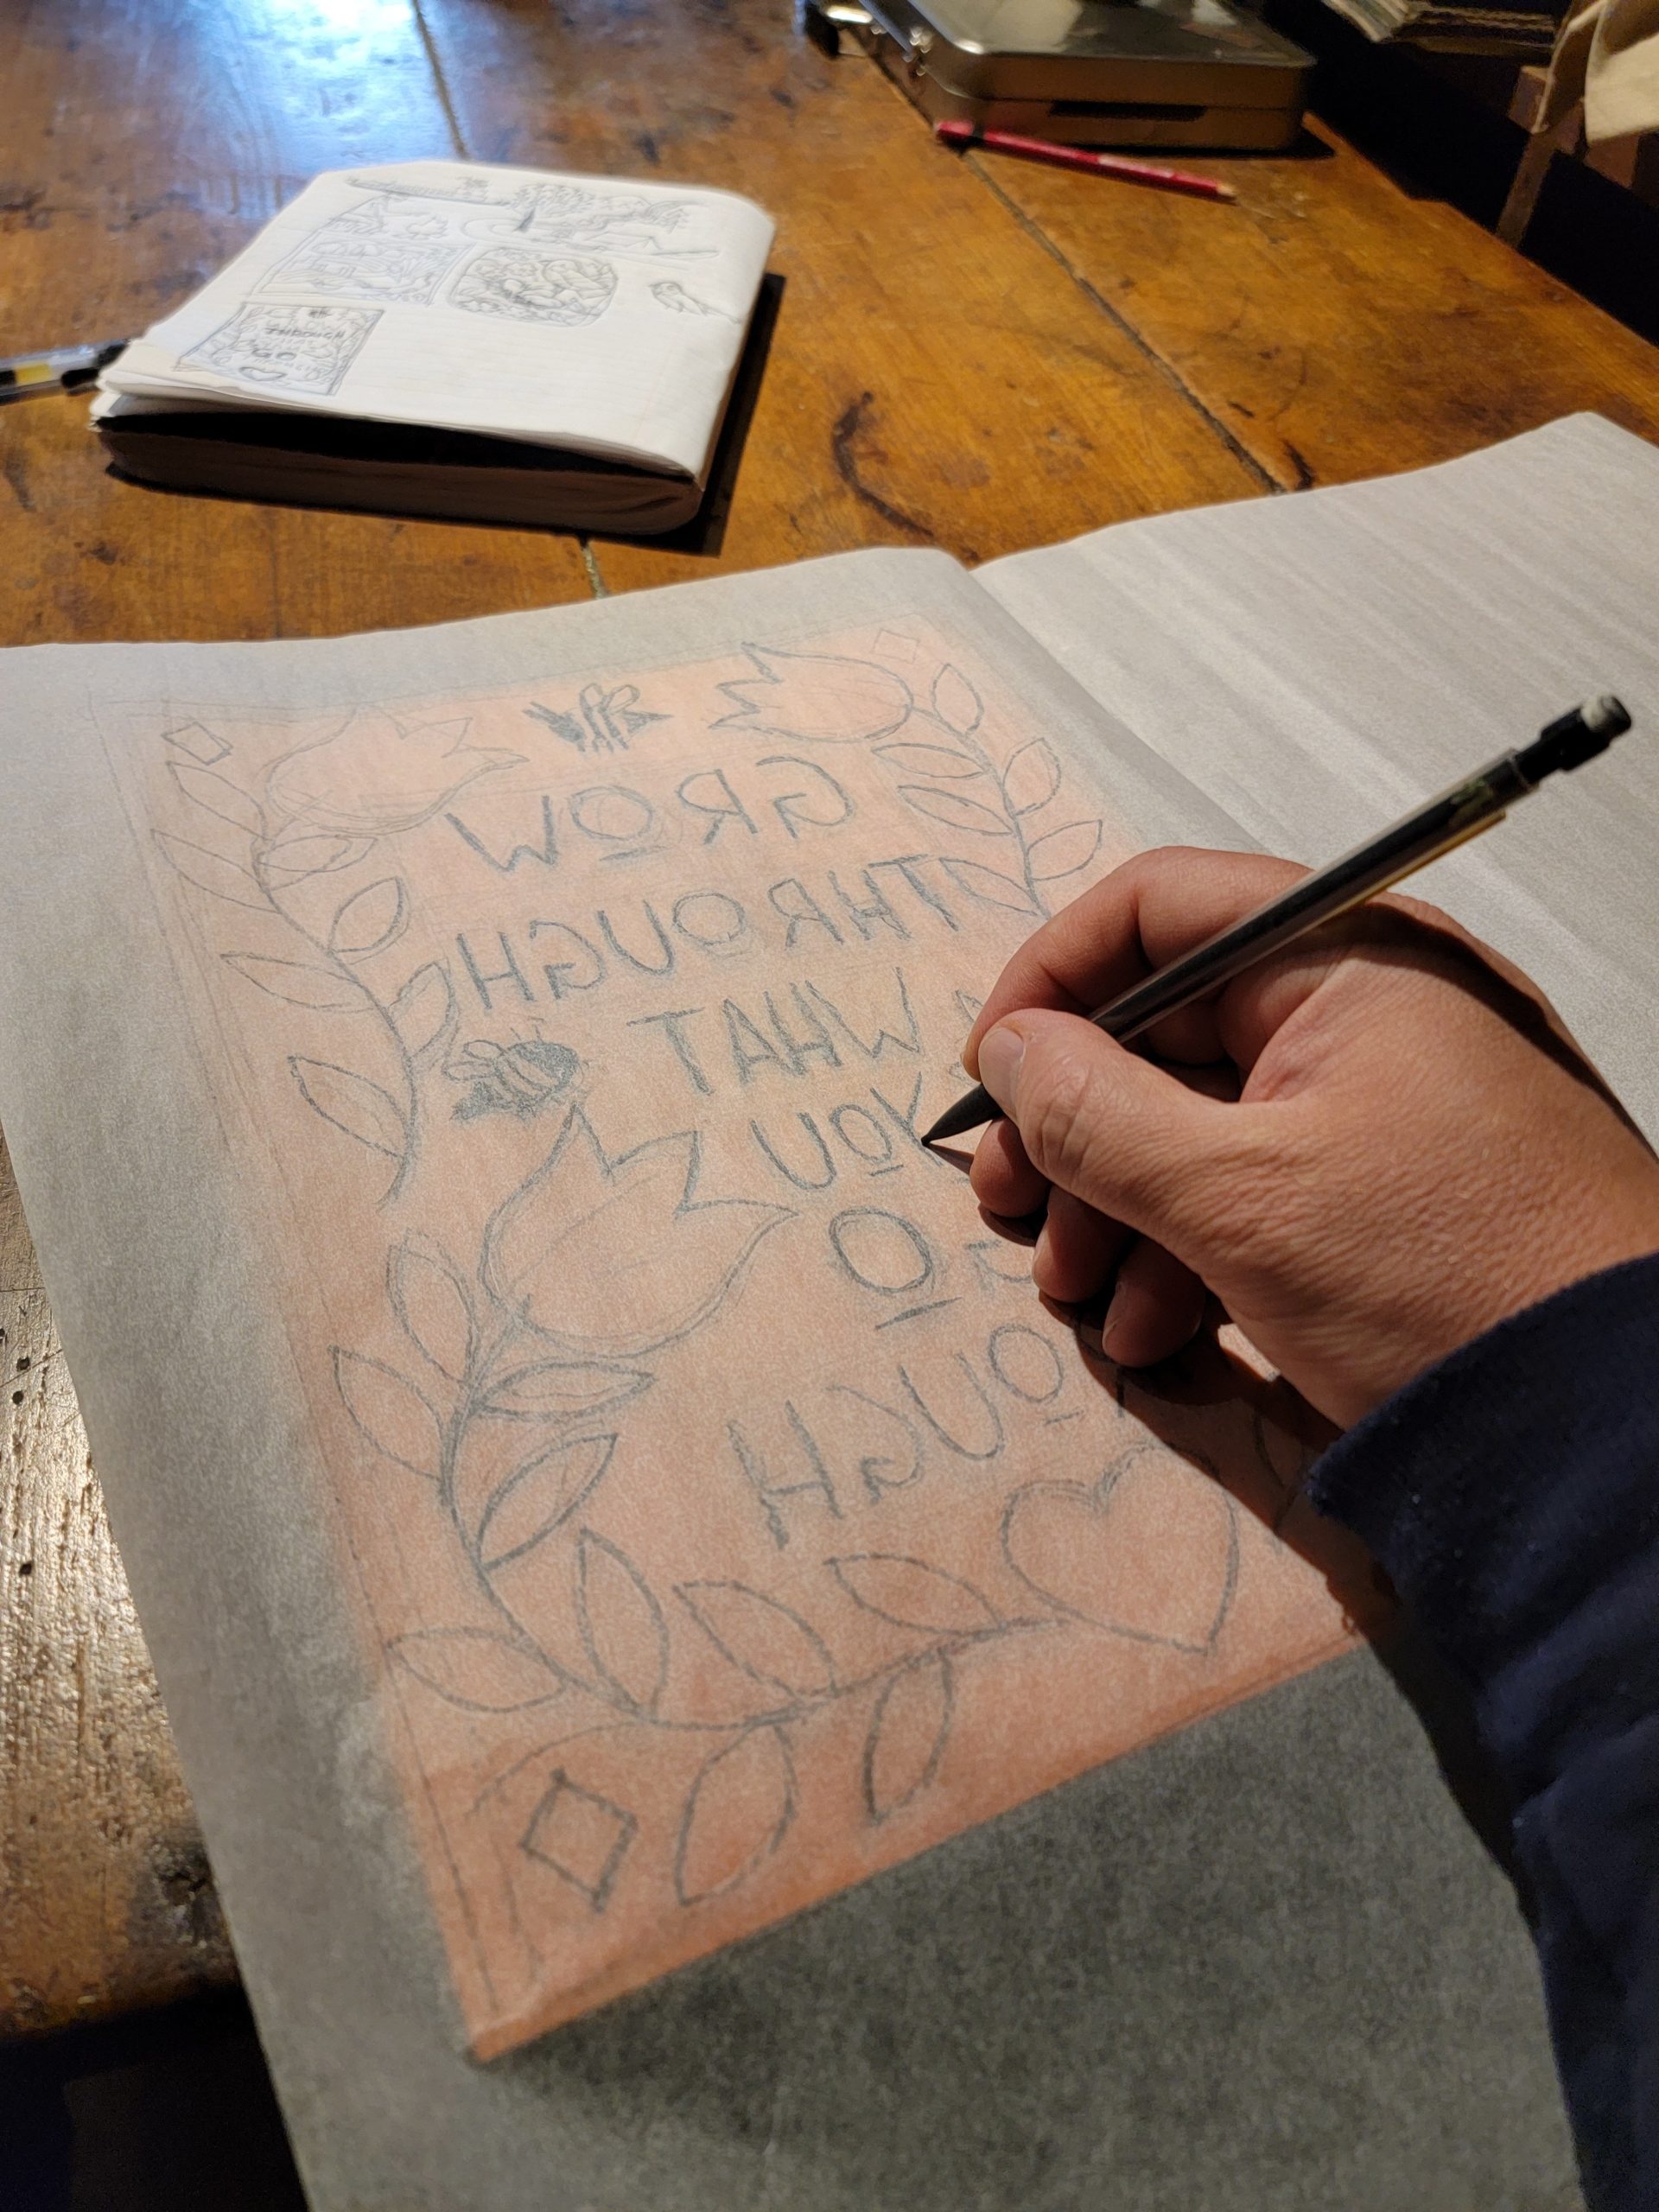 tracing design from paper to block of wood for woodcut printmaking